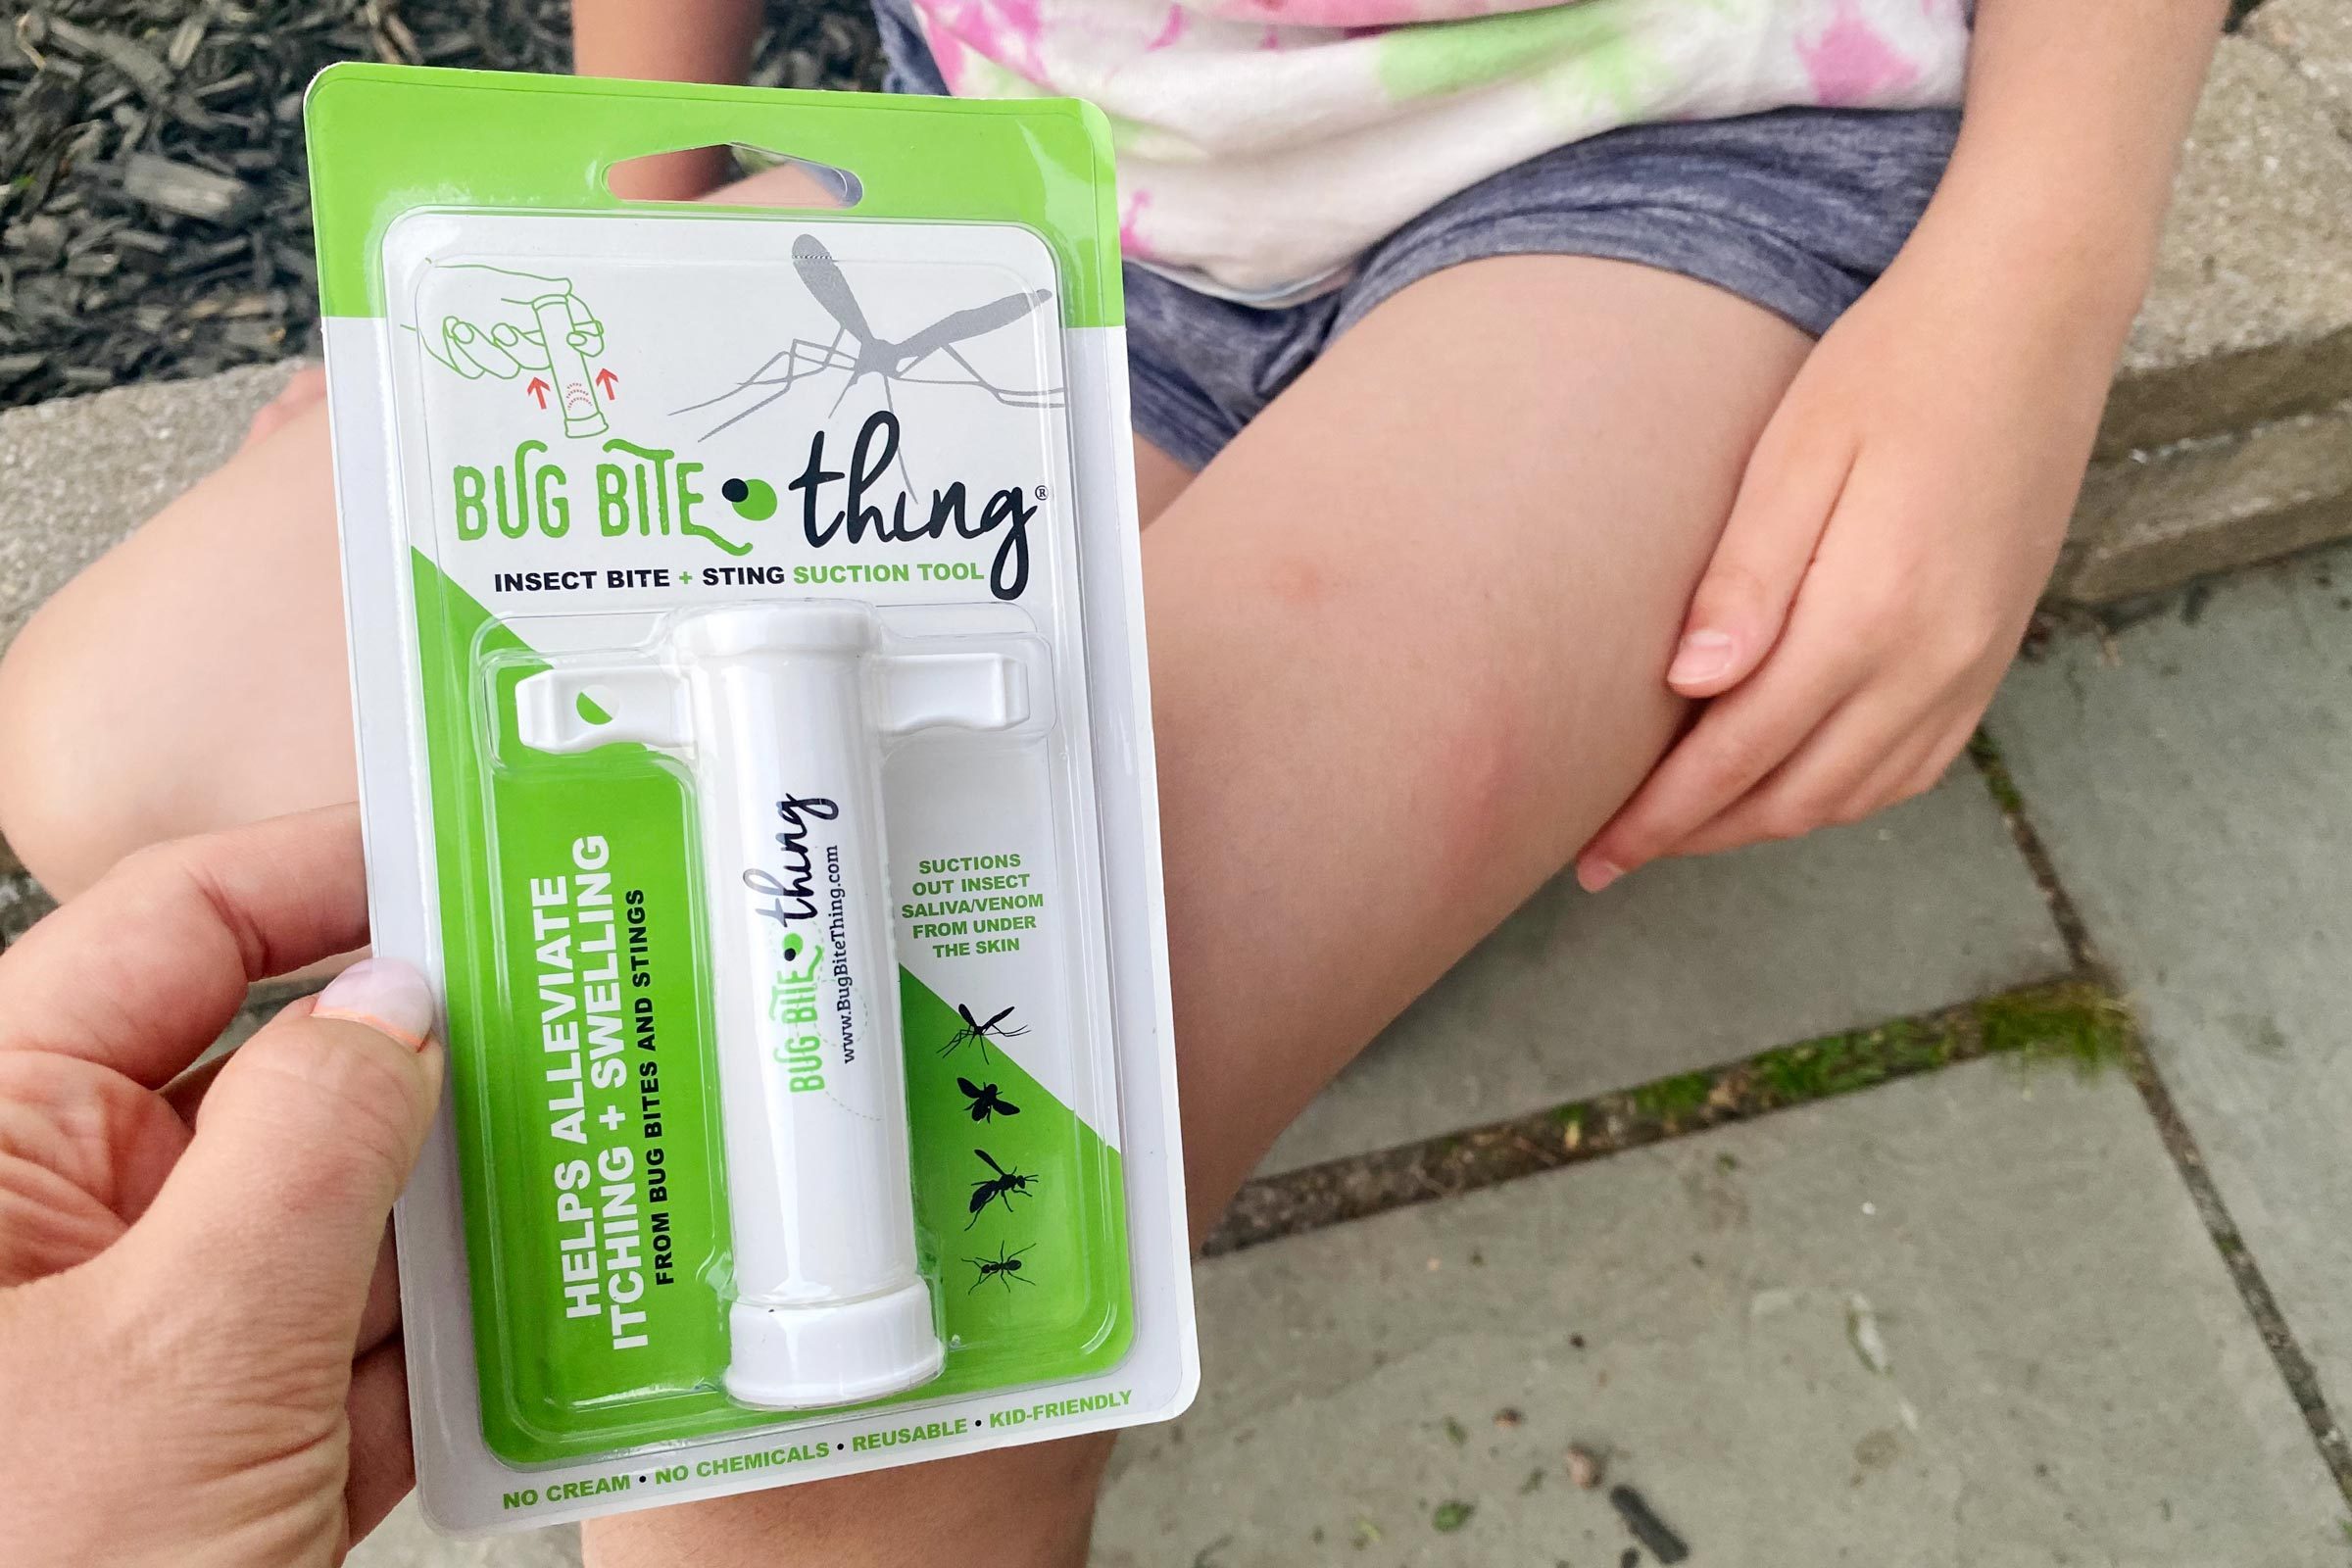 Local woman selling 'Bug Bite Thing' gets ready for the national stage